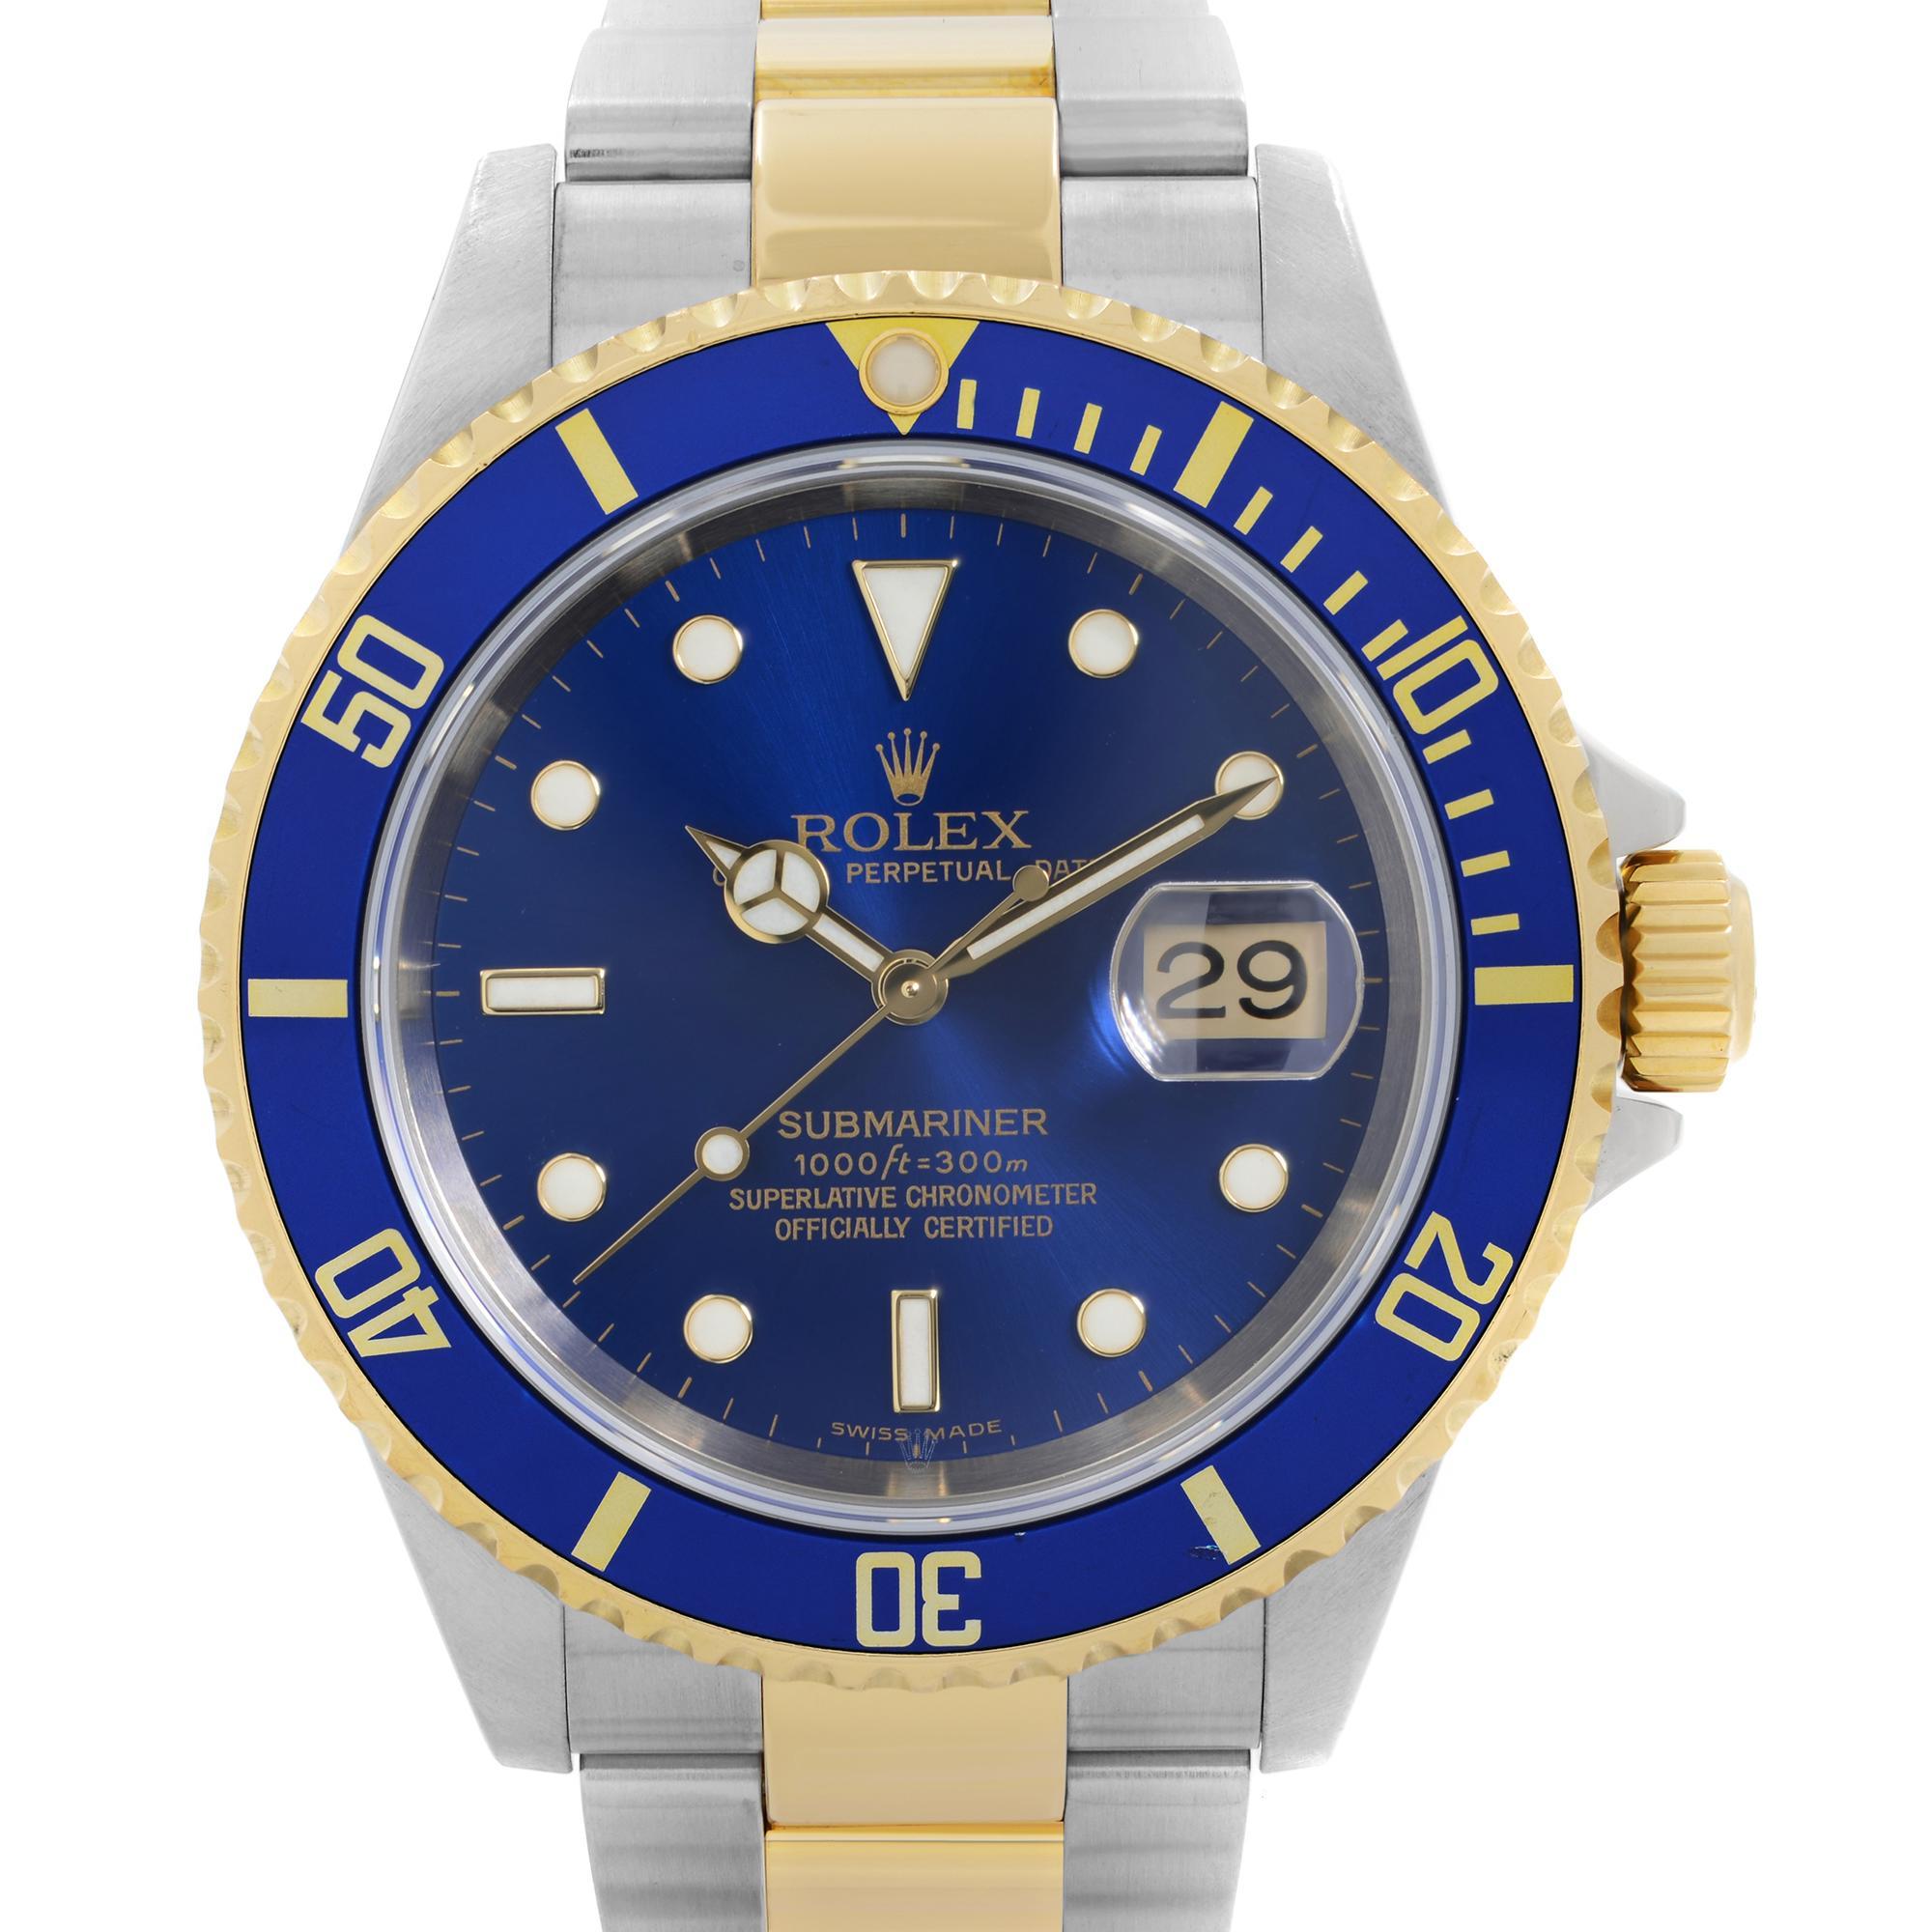 Pre-owned Rolex Submariner 40mm No Holes Case 18k Yellow Gold Steel Blur Dial Automatic Men's Watch 16613 T. Visible Nicks on Bezel Insert. This Beautiful Timepiece Was Produced in 2005 or 2006 and is Powered by Mechanical (Automatic) Movement And